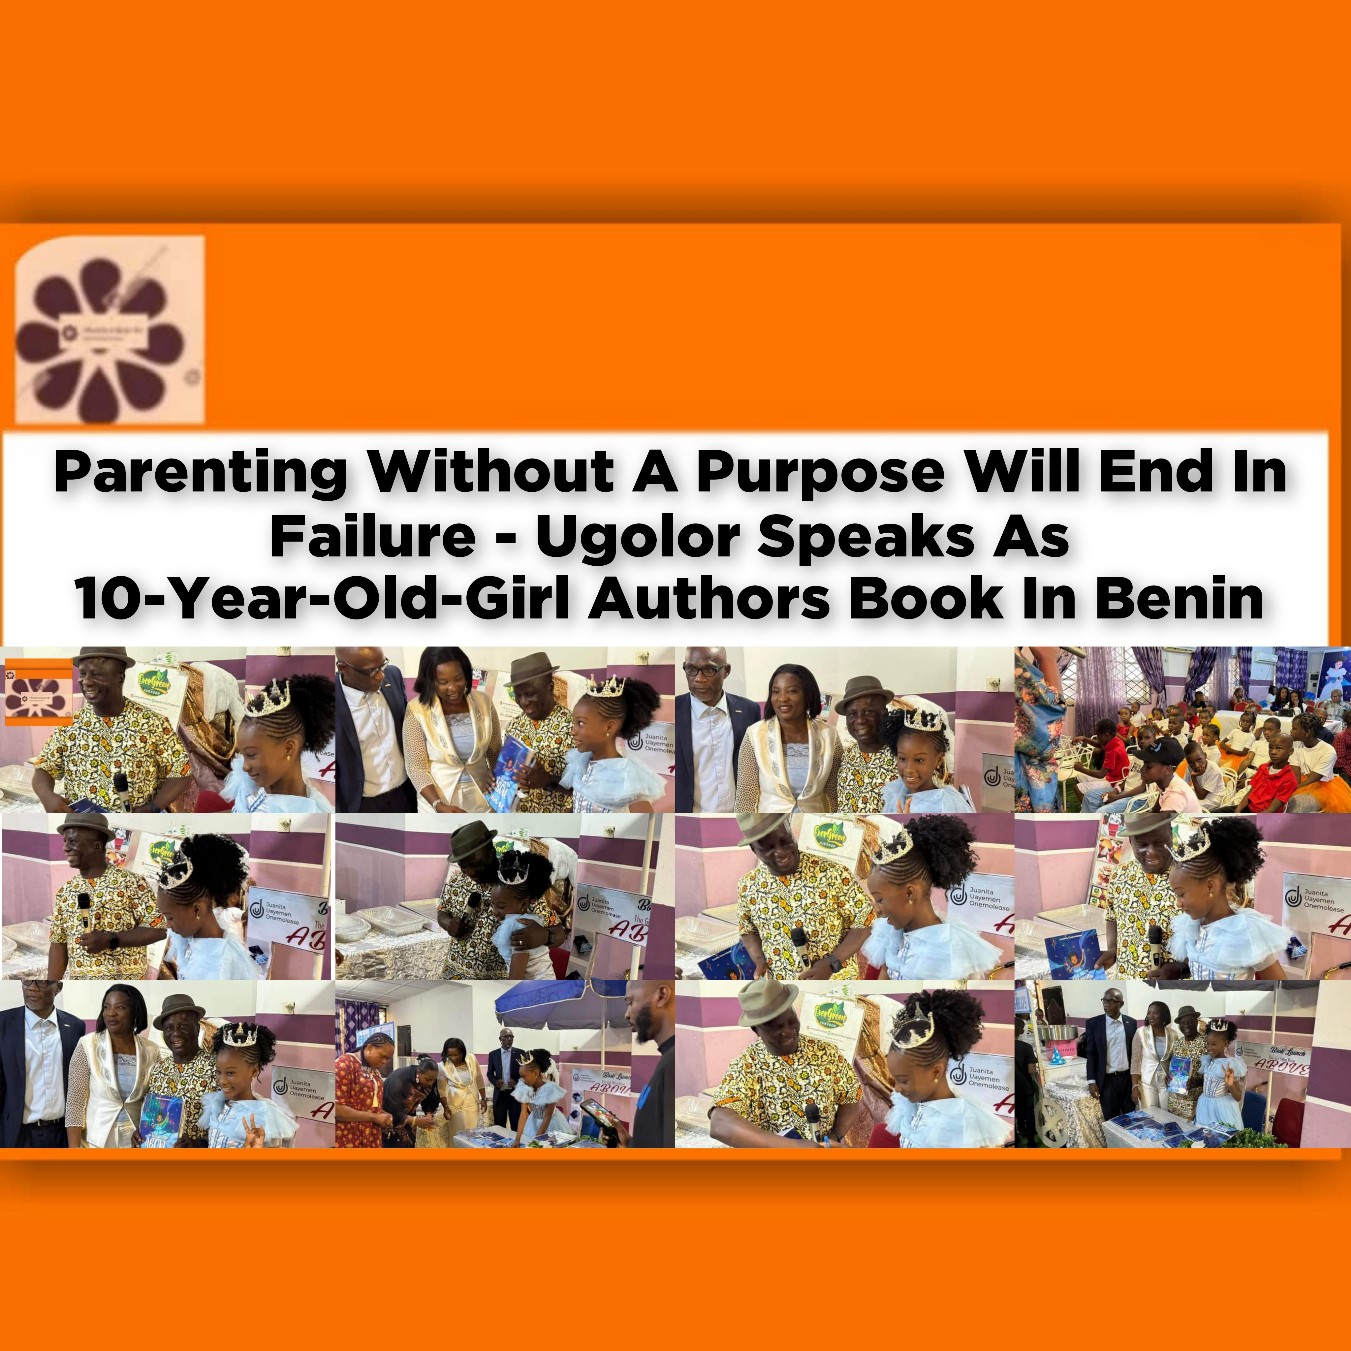 Parenting Without A Purpose Will End In Failure - Ugolor Speaks As 10-Year-Old-Girl Authors Book In Benin ~ OsazuwaAkonedo #Islamabad